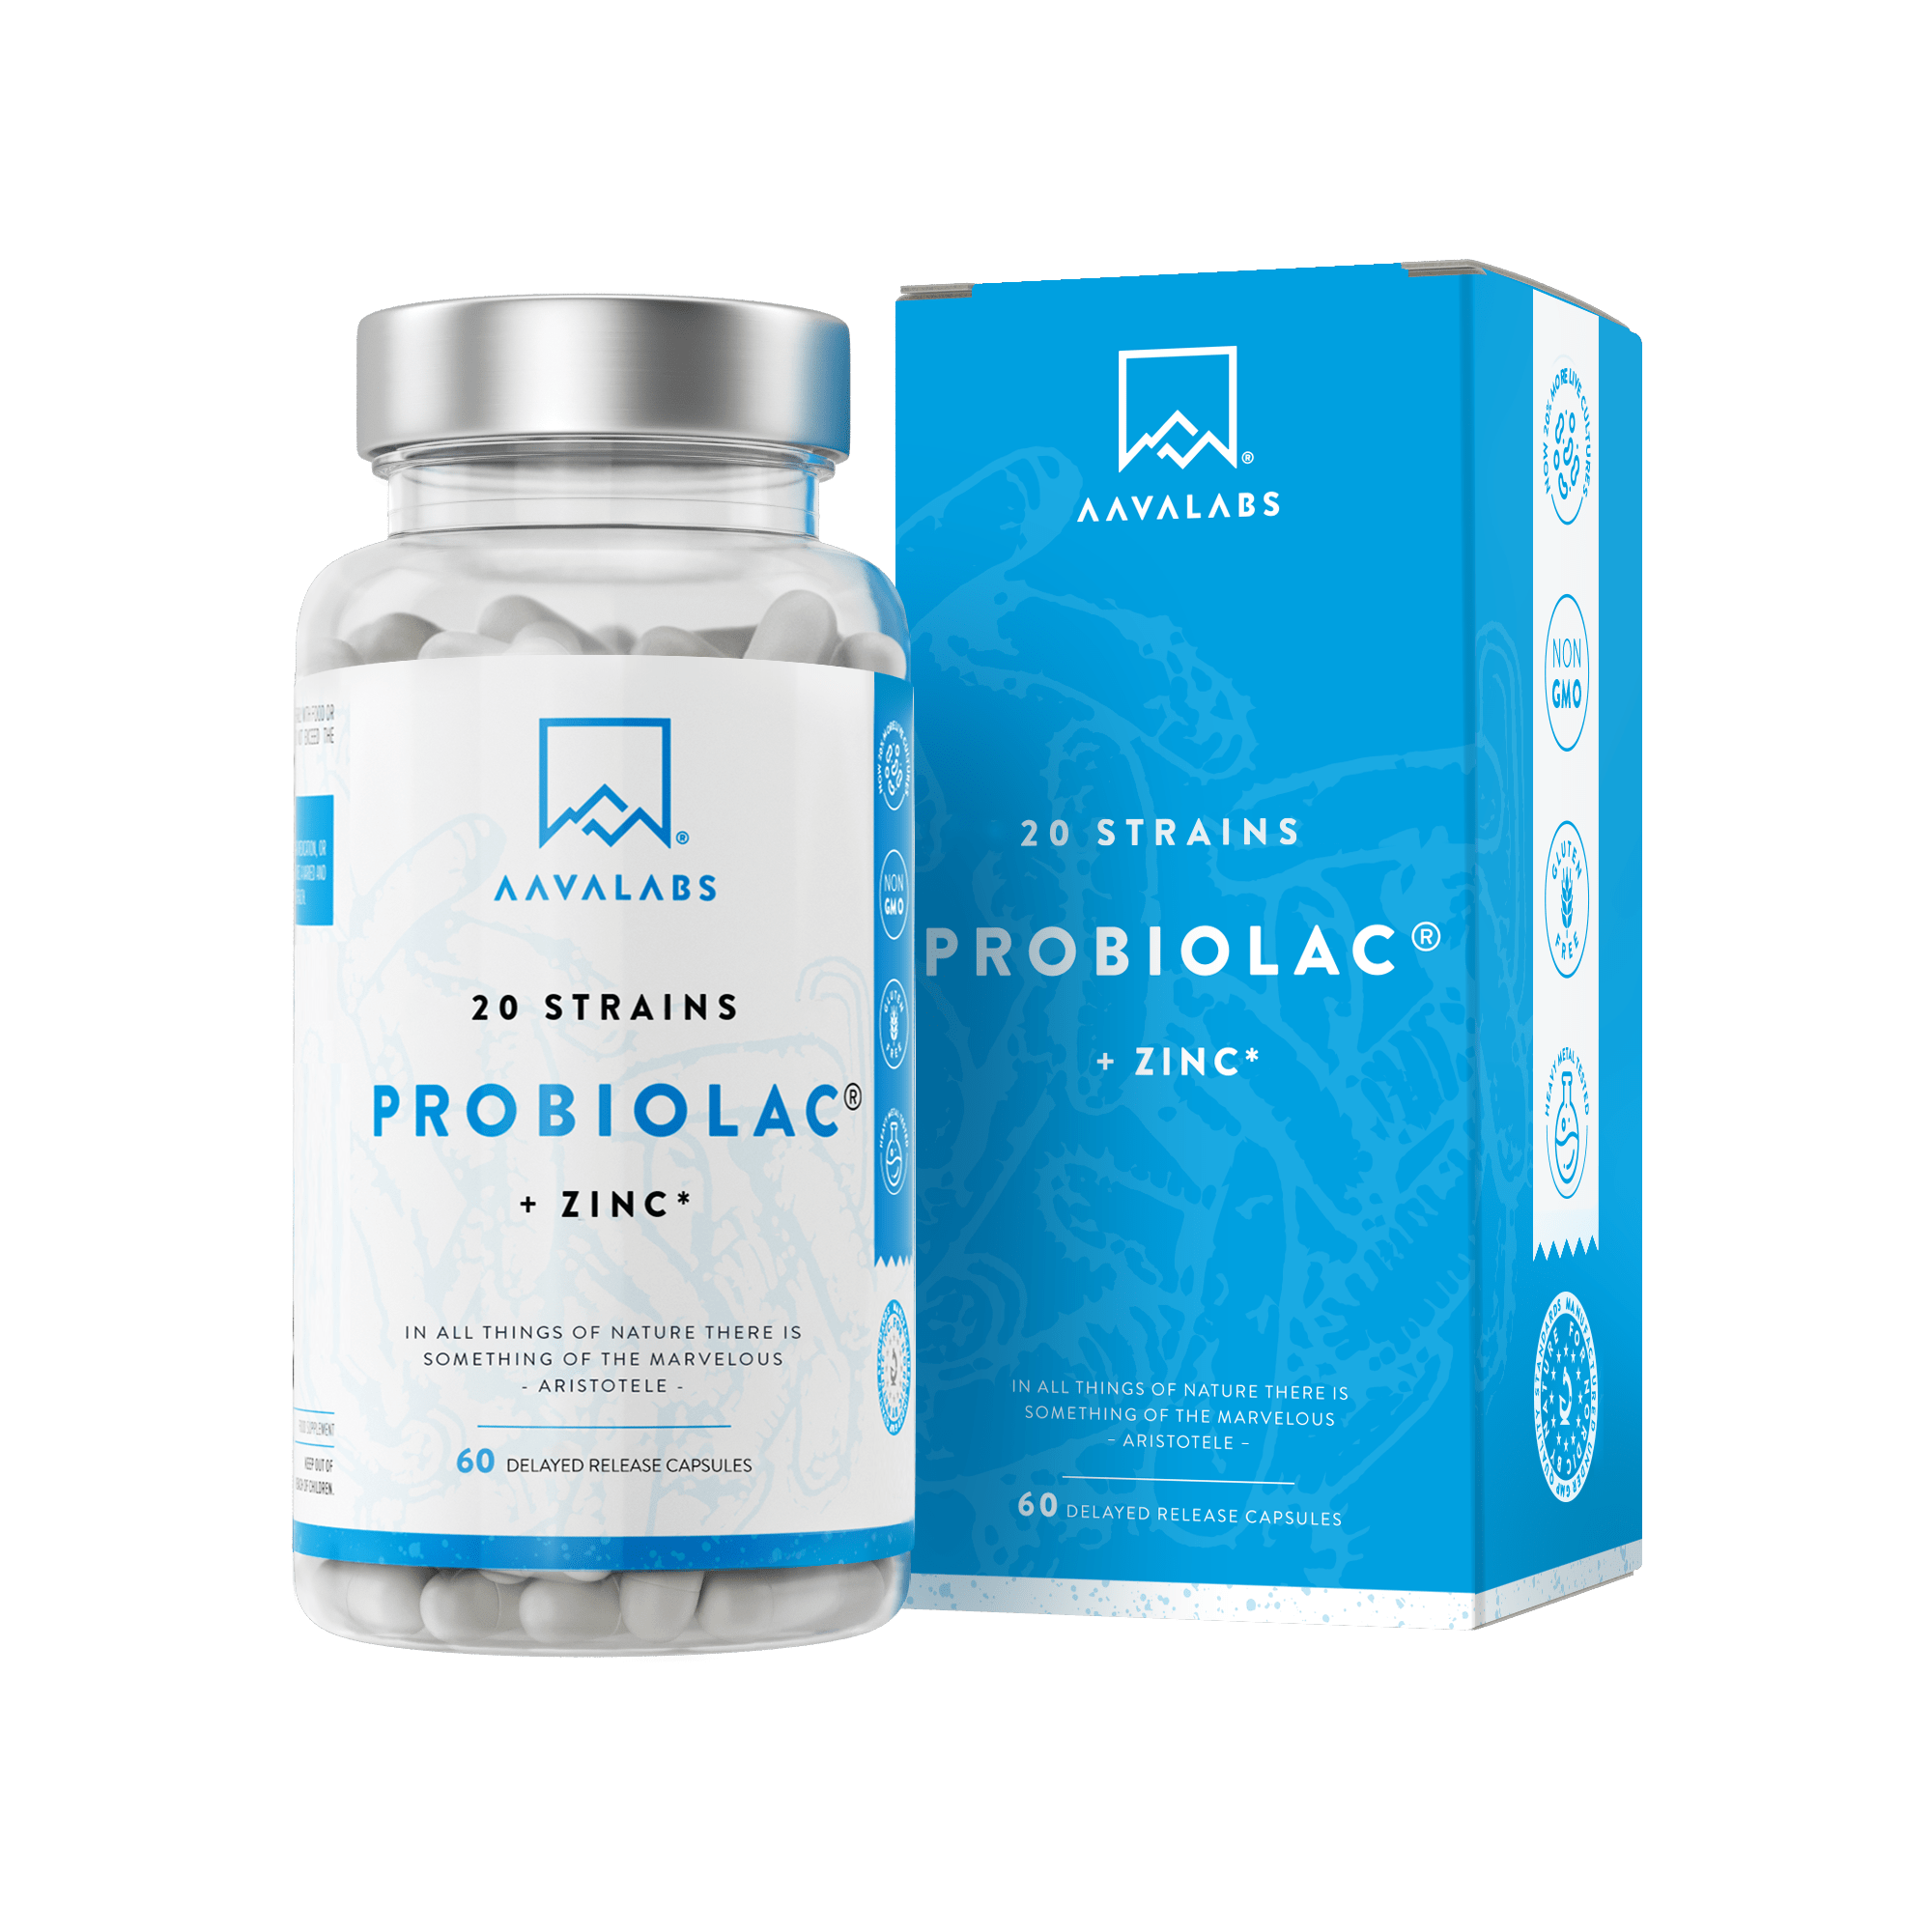 Aavalabs Probiolac Probiotic 20 Strains and zinc